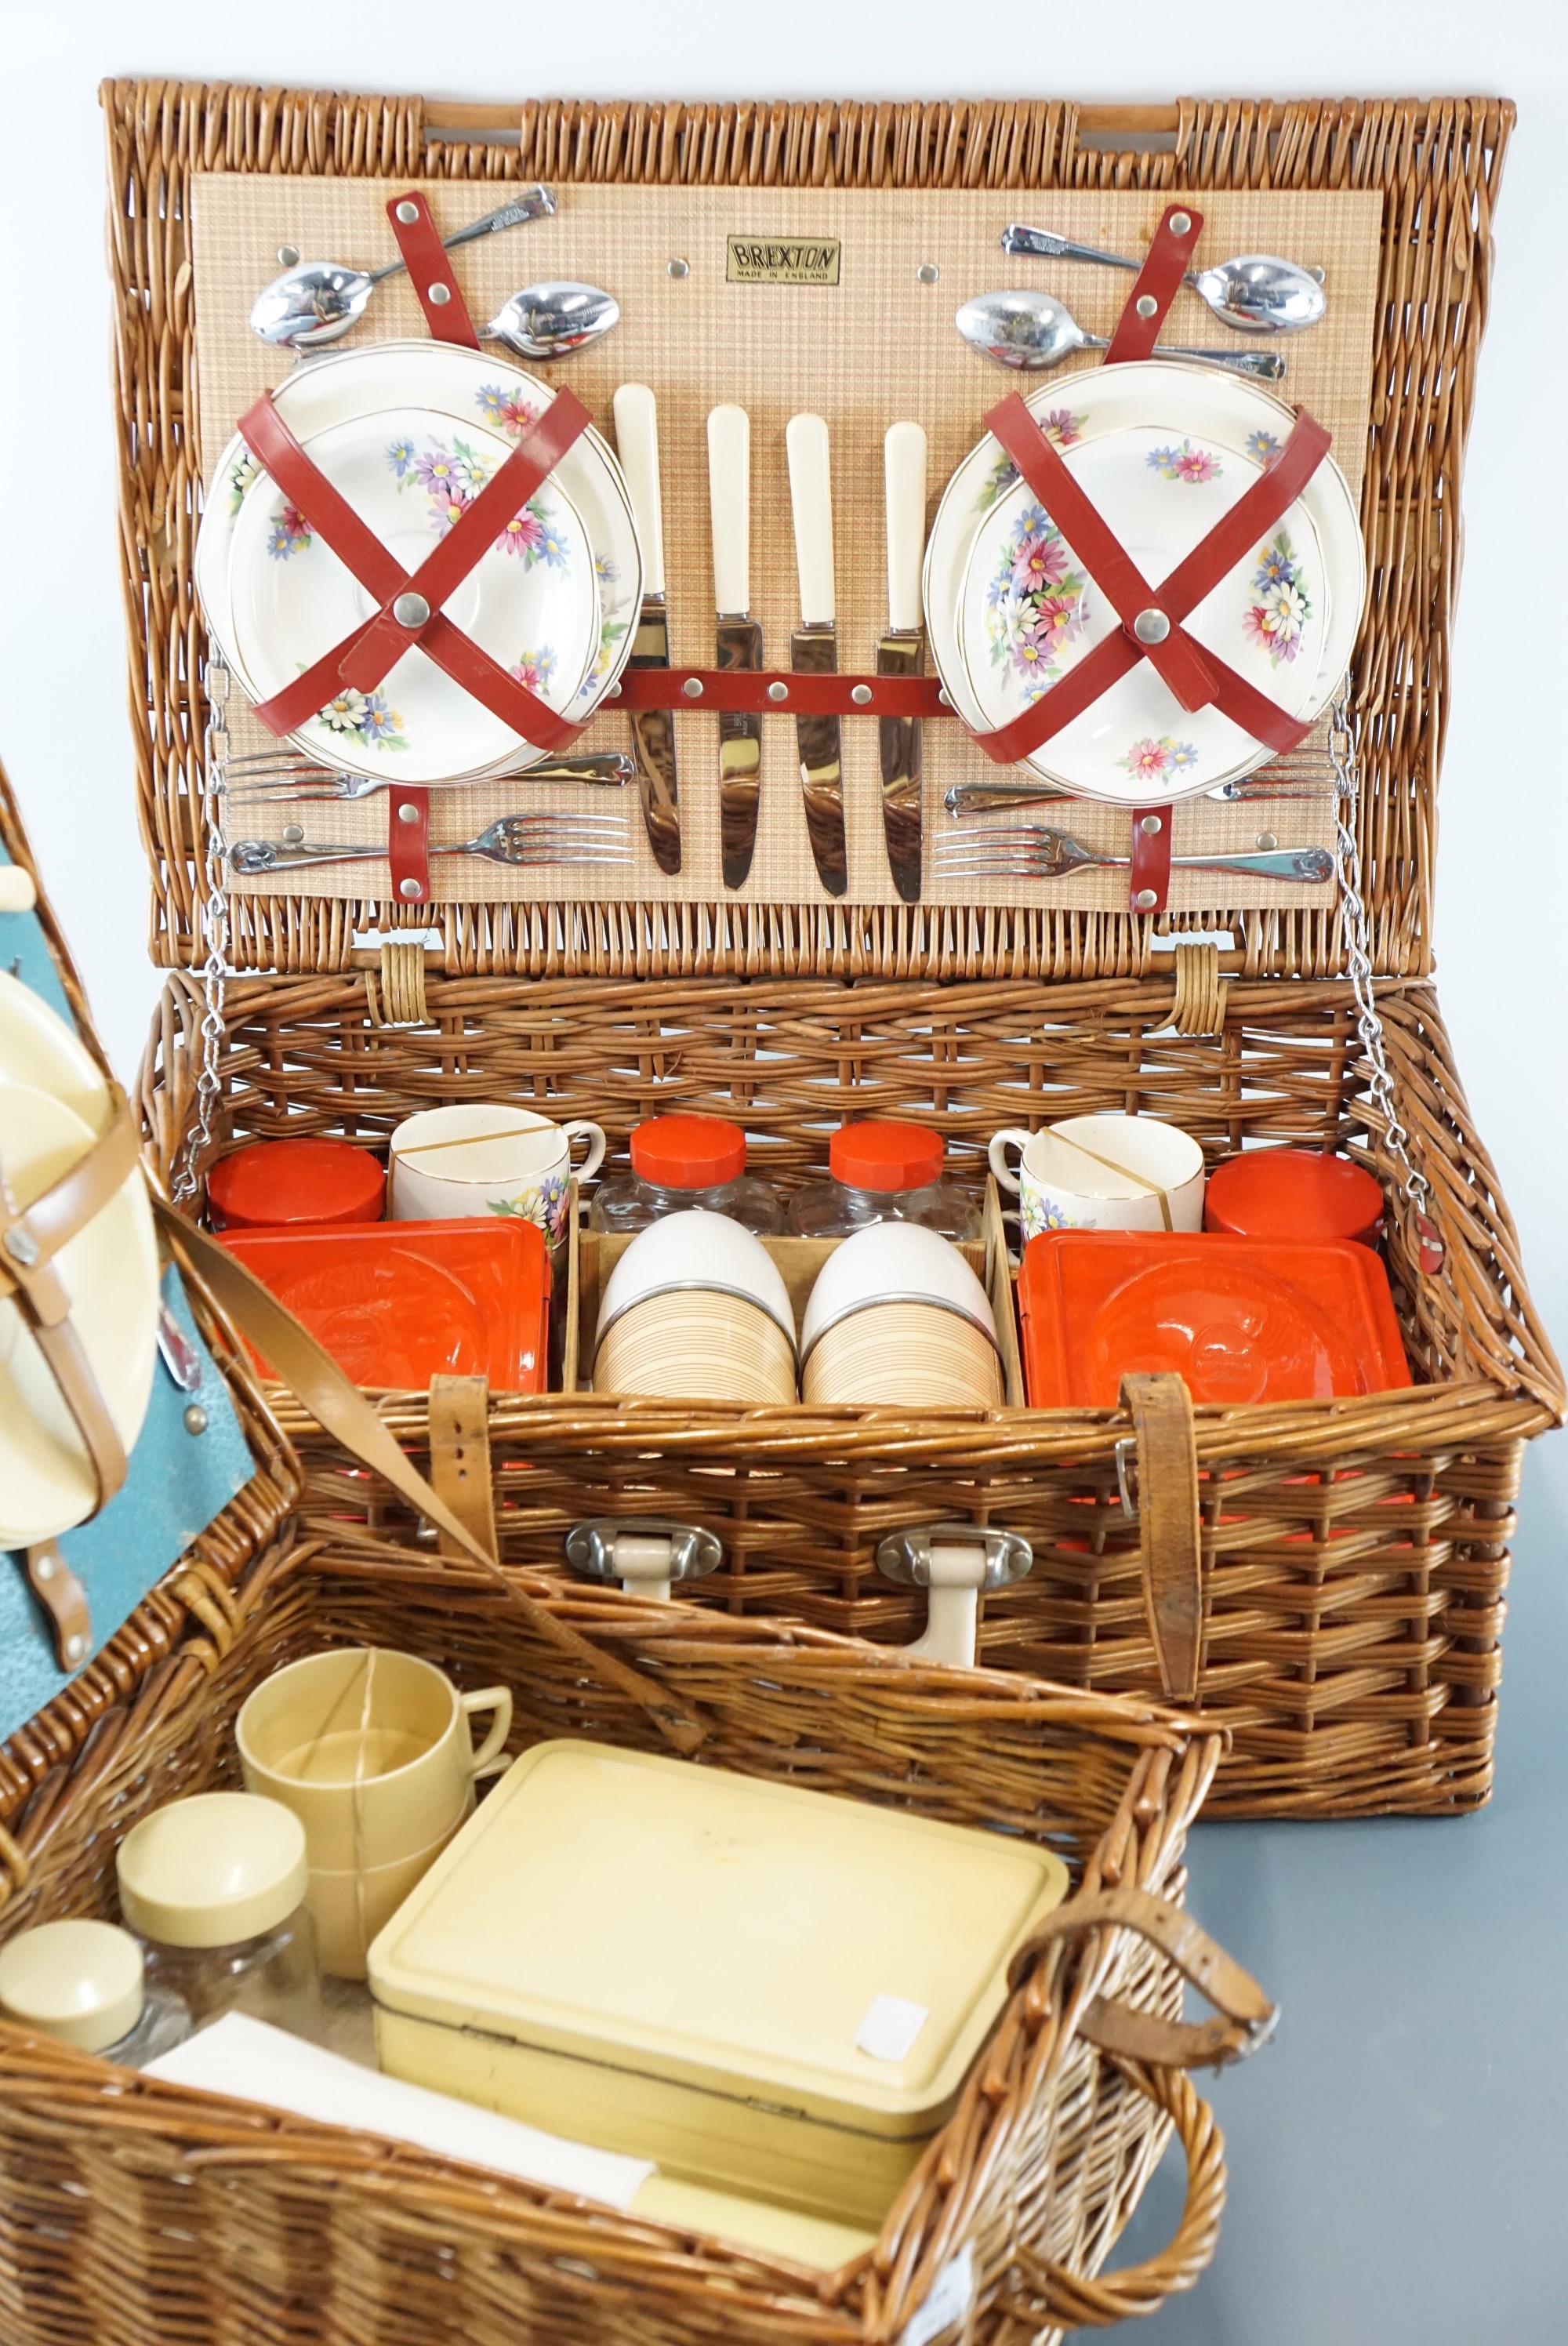 Brexton and Sirram picnic hampers - Image 2 of 2